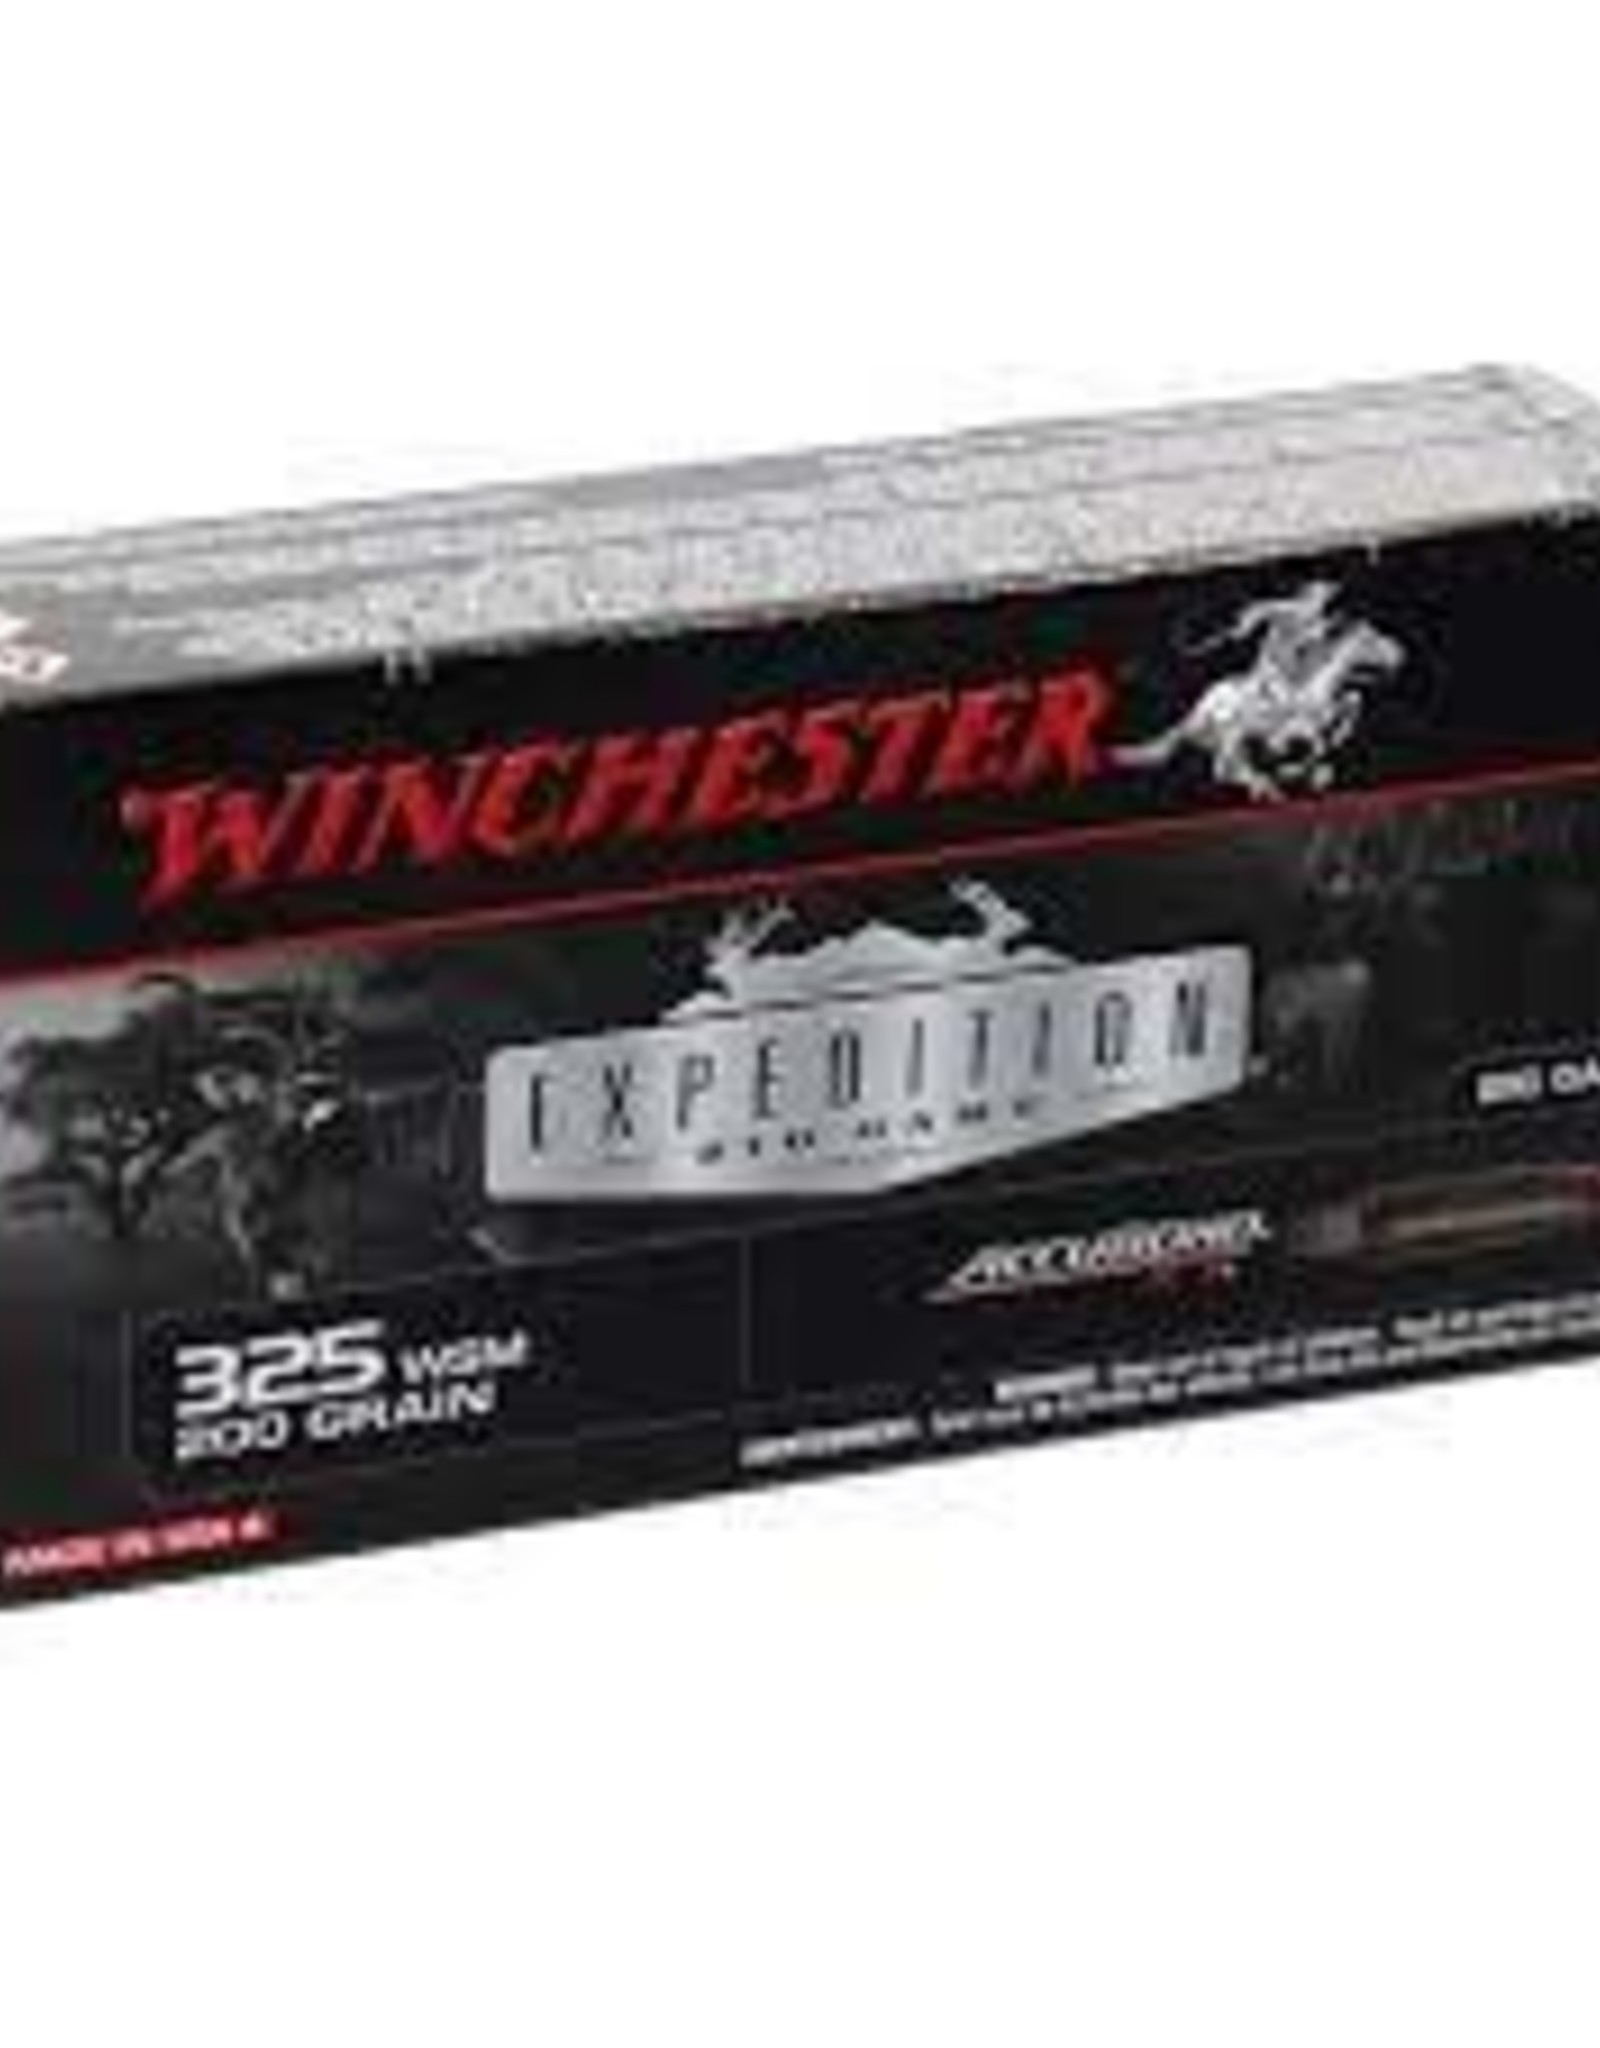 Winchester Expedition Big Game 325 WSM 200 Grain